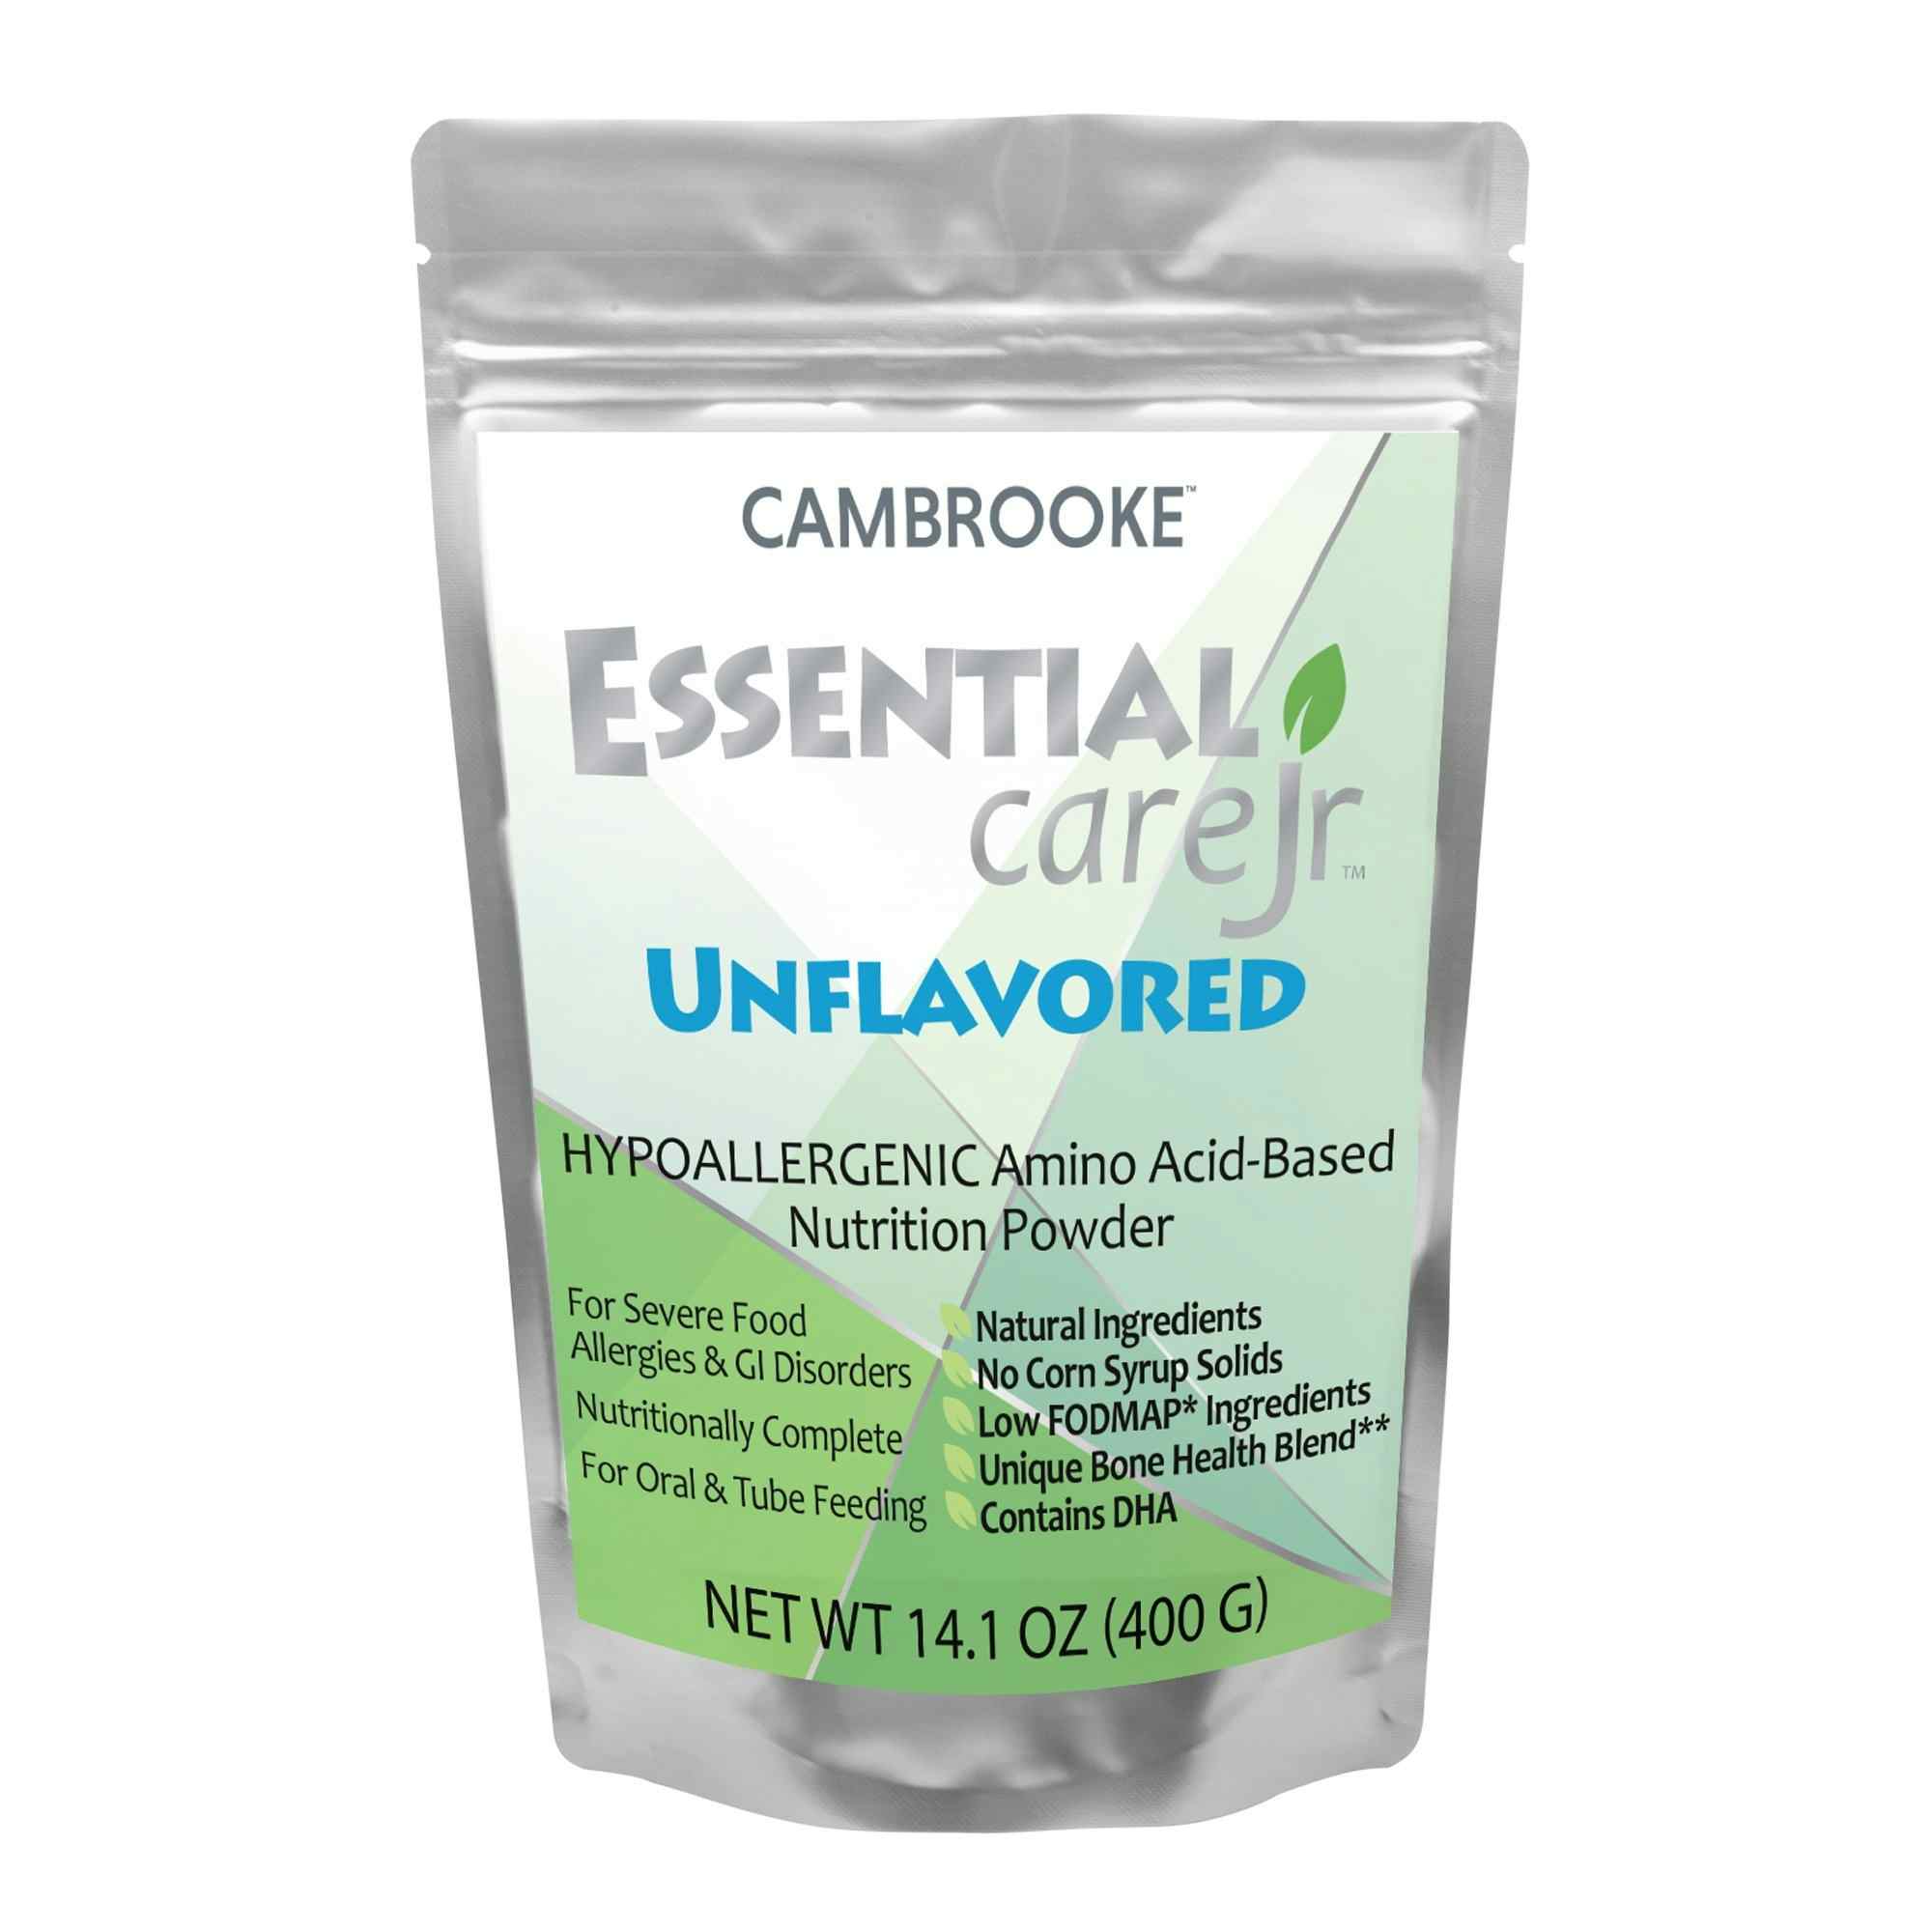 Cambrooke Essential Care Jr. Unflavored Hypoallergenic Amino Acid-Based Nutrition Powder, 14.1 oz., 48021, 1 Each